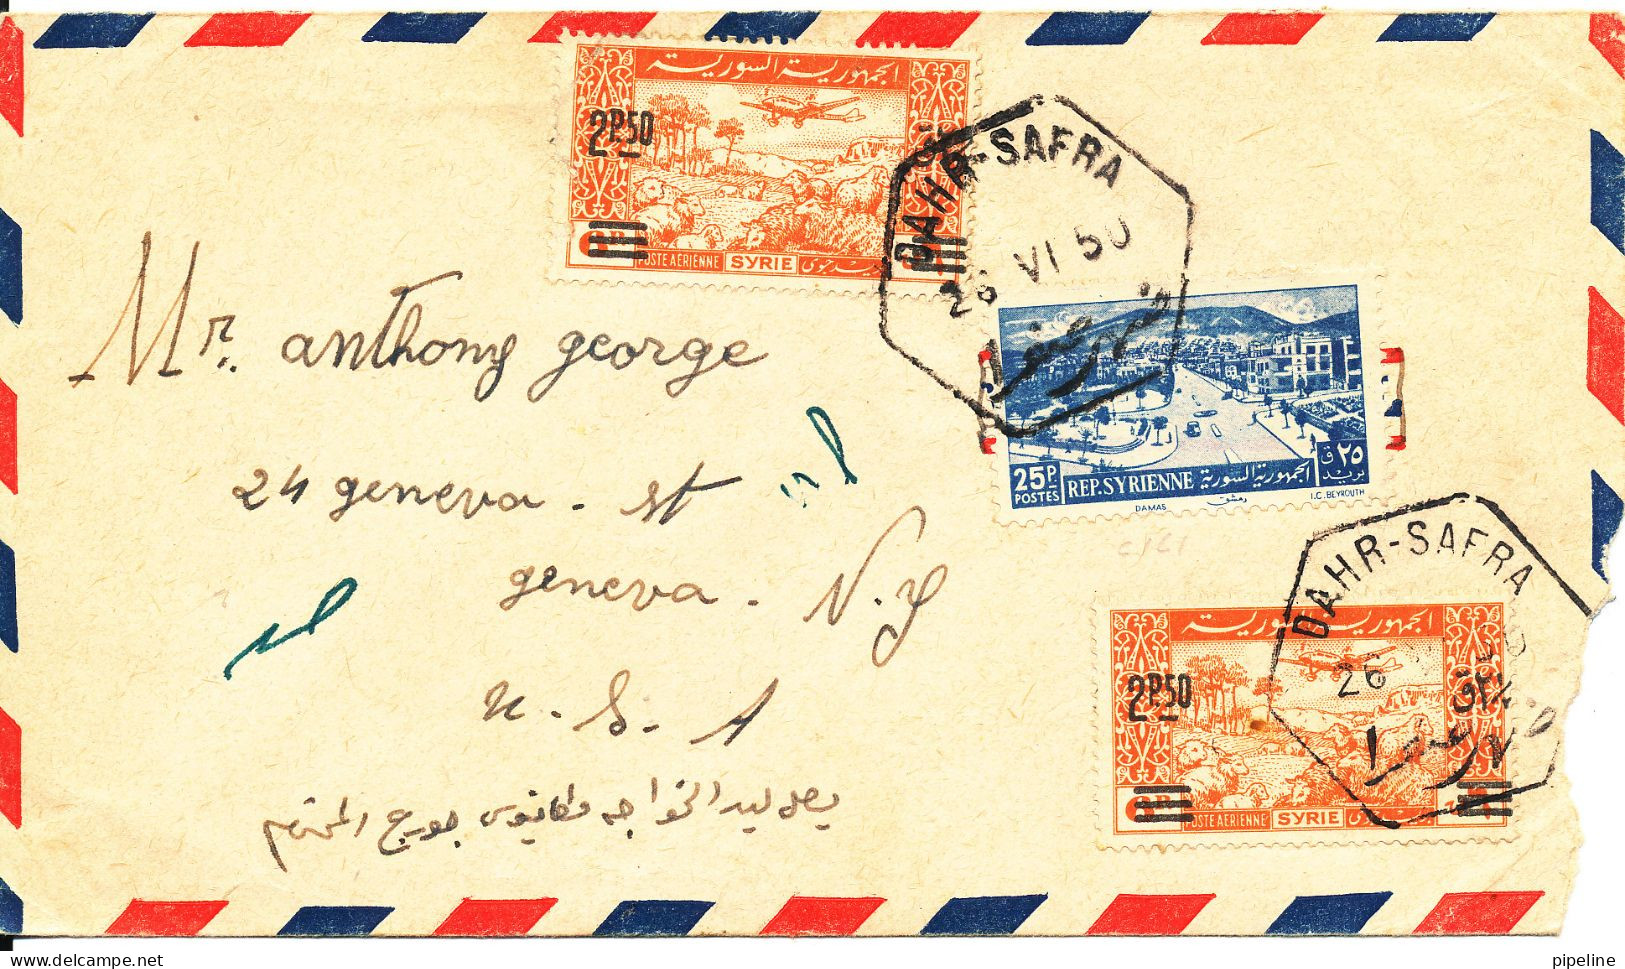 Syria Air Mail Cover Sent To USA Dahr Safra 26-6-1950 Overprinted Stamps The Cover Is Damaged In The Right Side - Syria